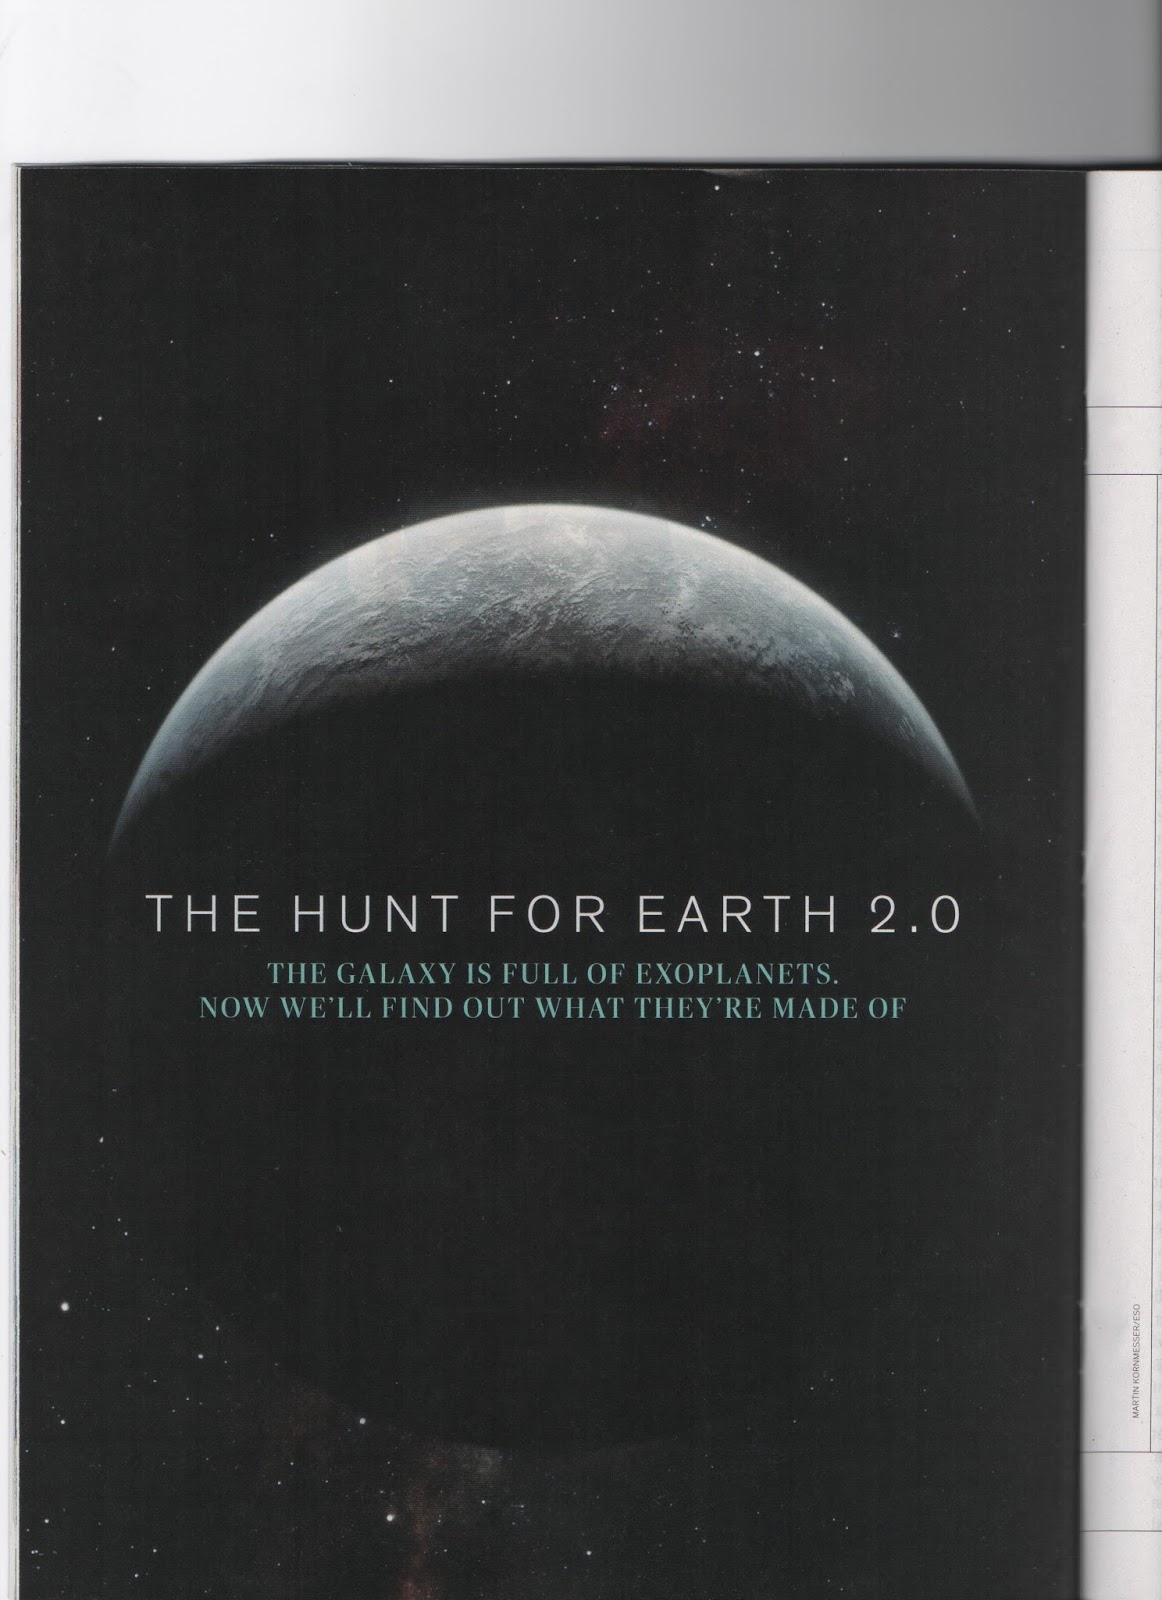 http://engineeeringcomputerworks.com/The_Hunt_For_Earth_2.pdf